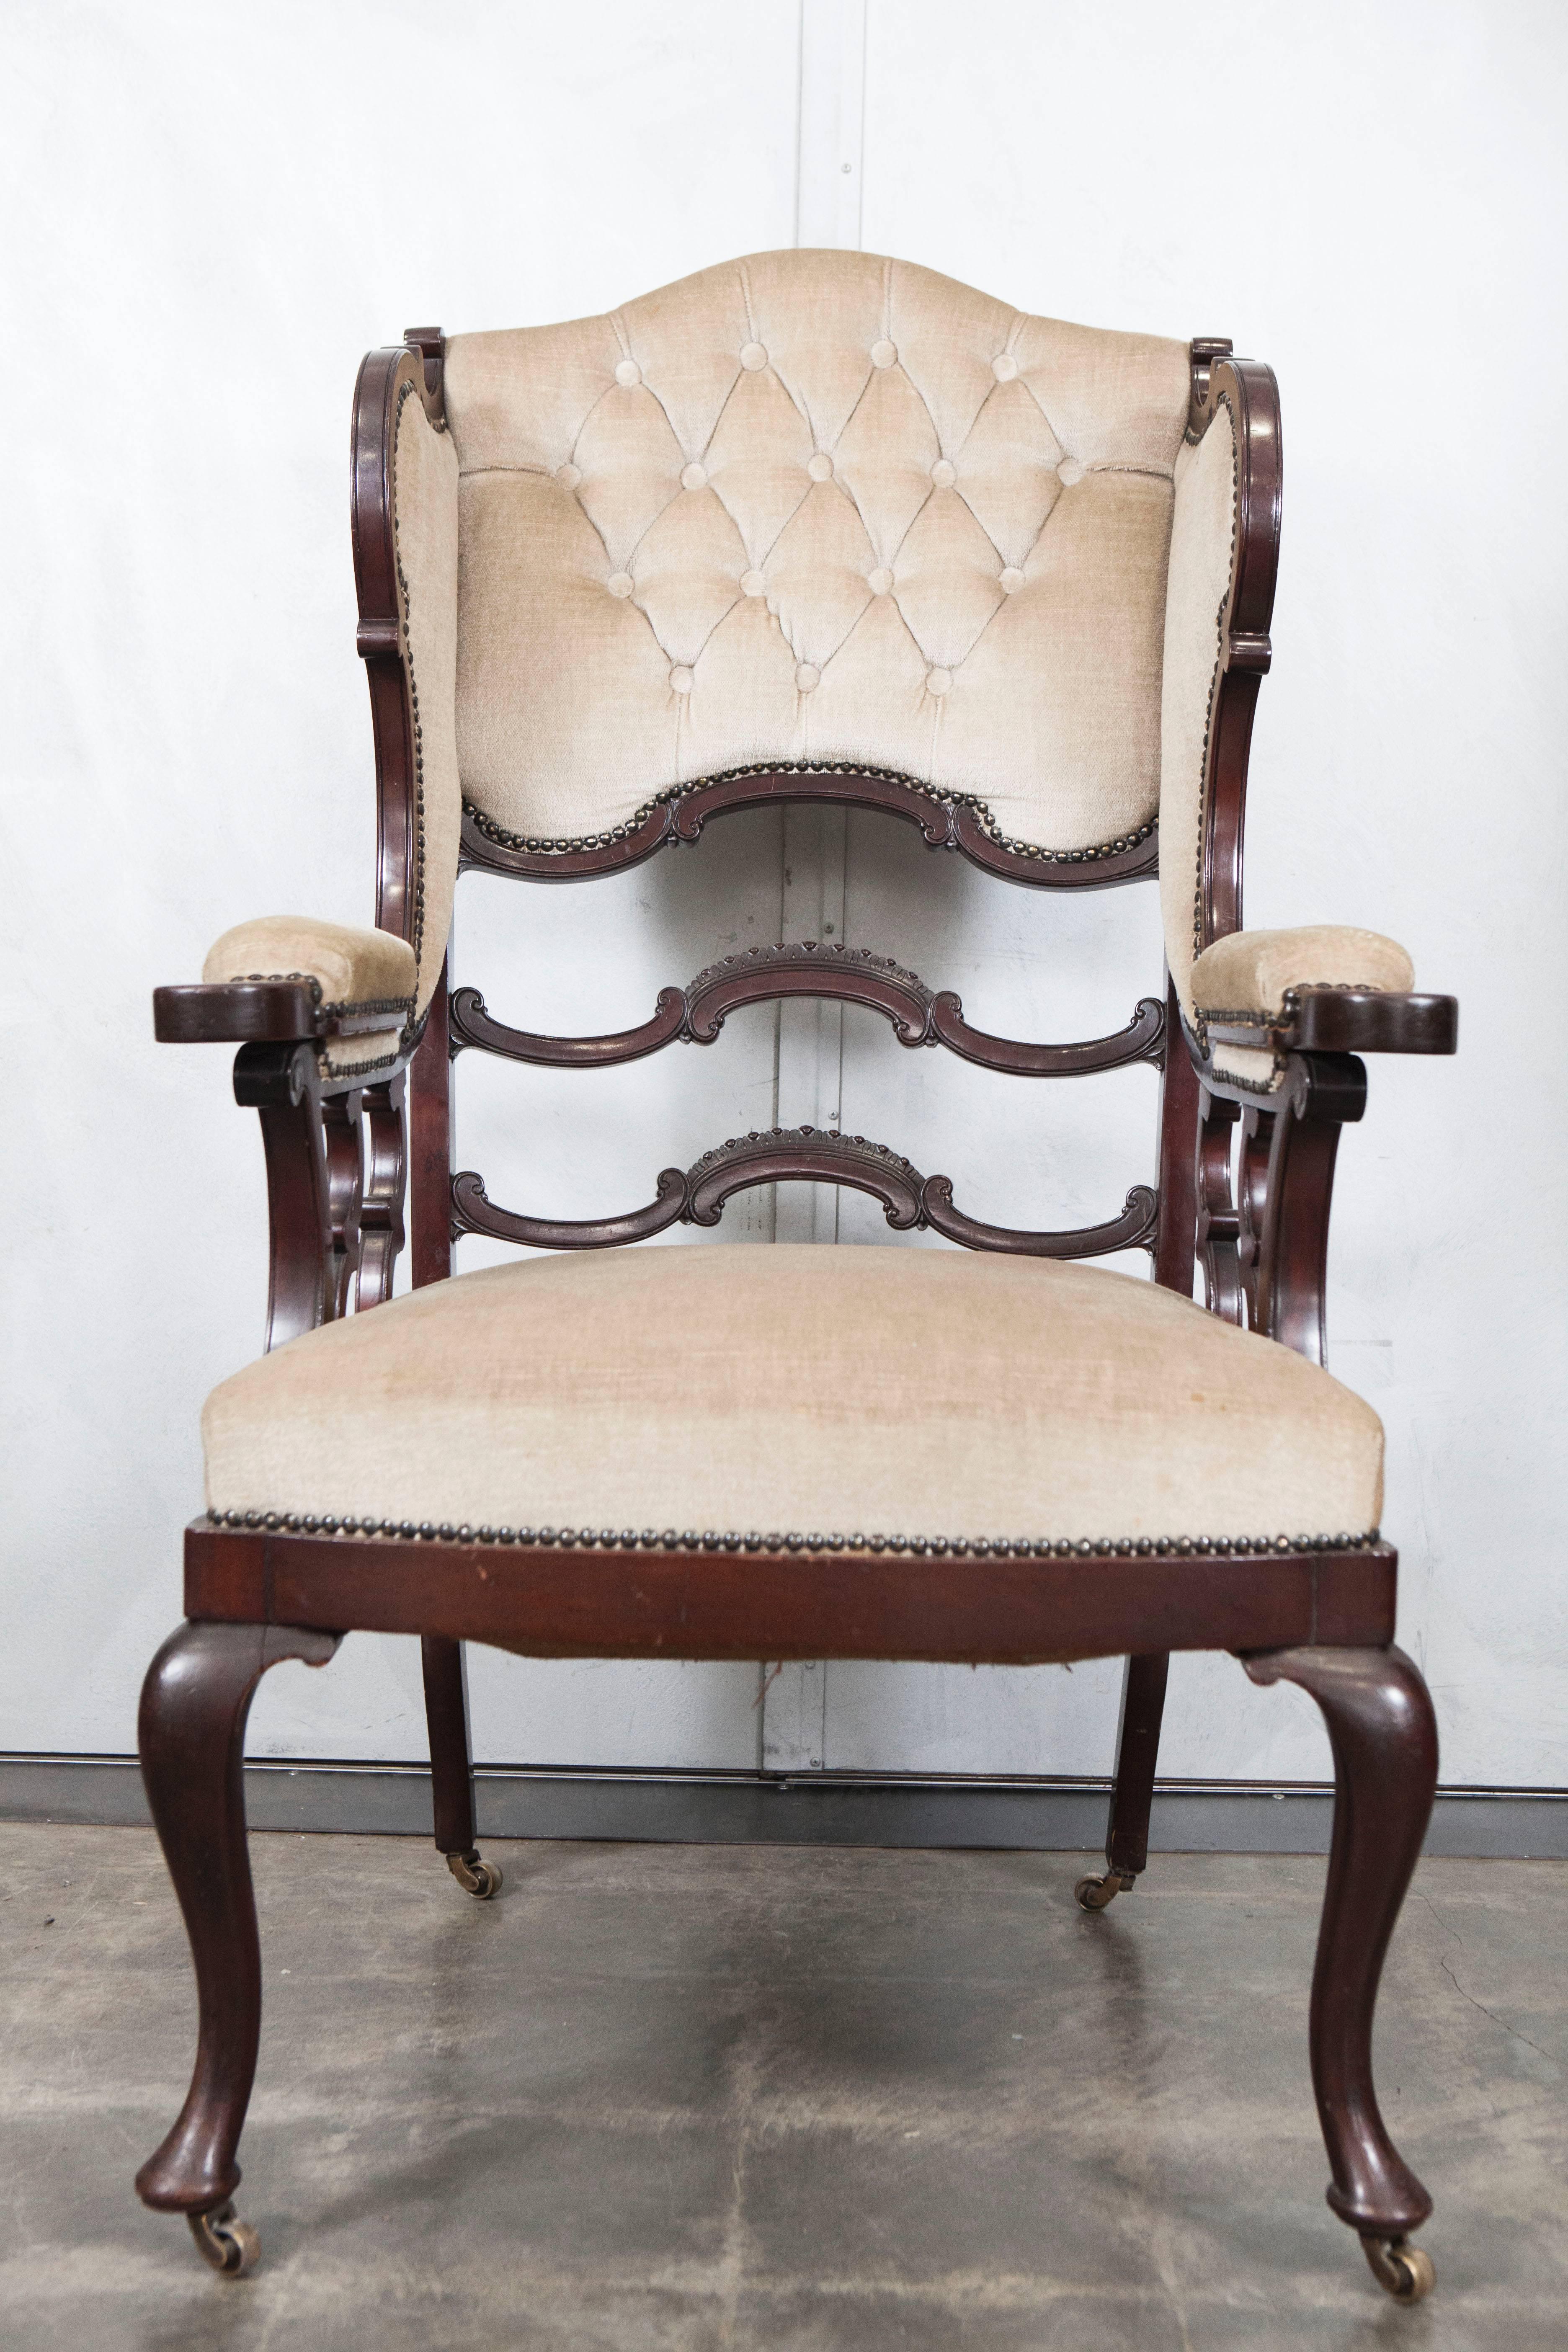 This wingback armchair is likely from late Victorian age with indications of period craftsmanship and signs of age. It's style is something of a wonder with interesting open back and open-arm design elements that seem to be an individual designer's